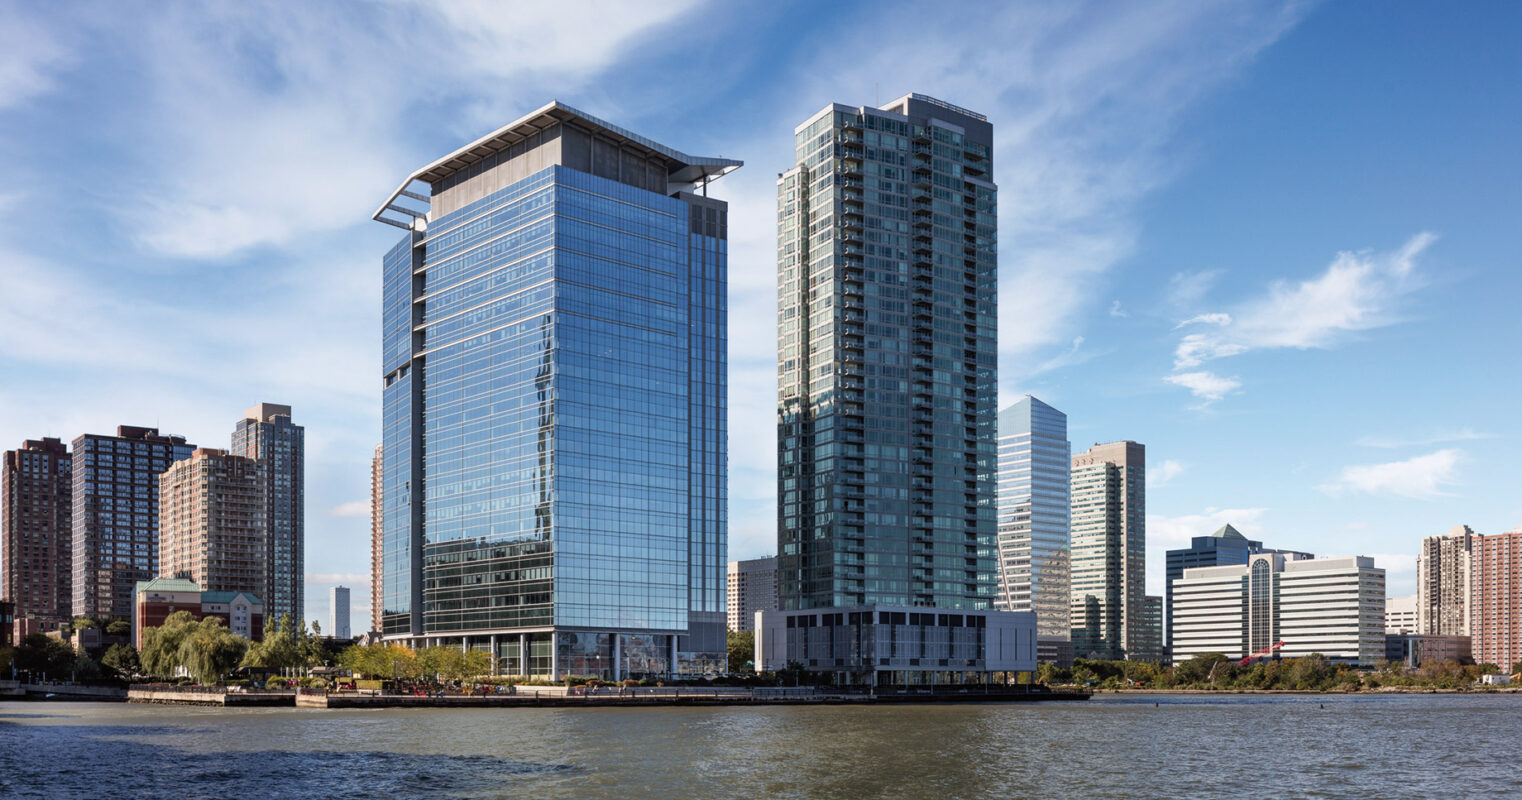 Modern skyscrapers by the waterfront against a clear blue sky, exemplifying contemporary urban architecture.